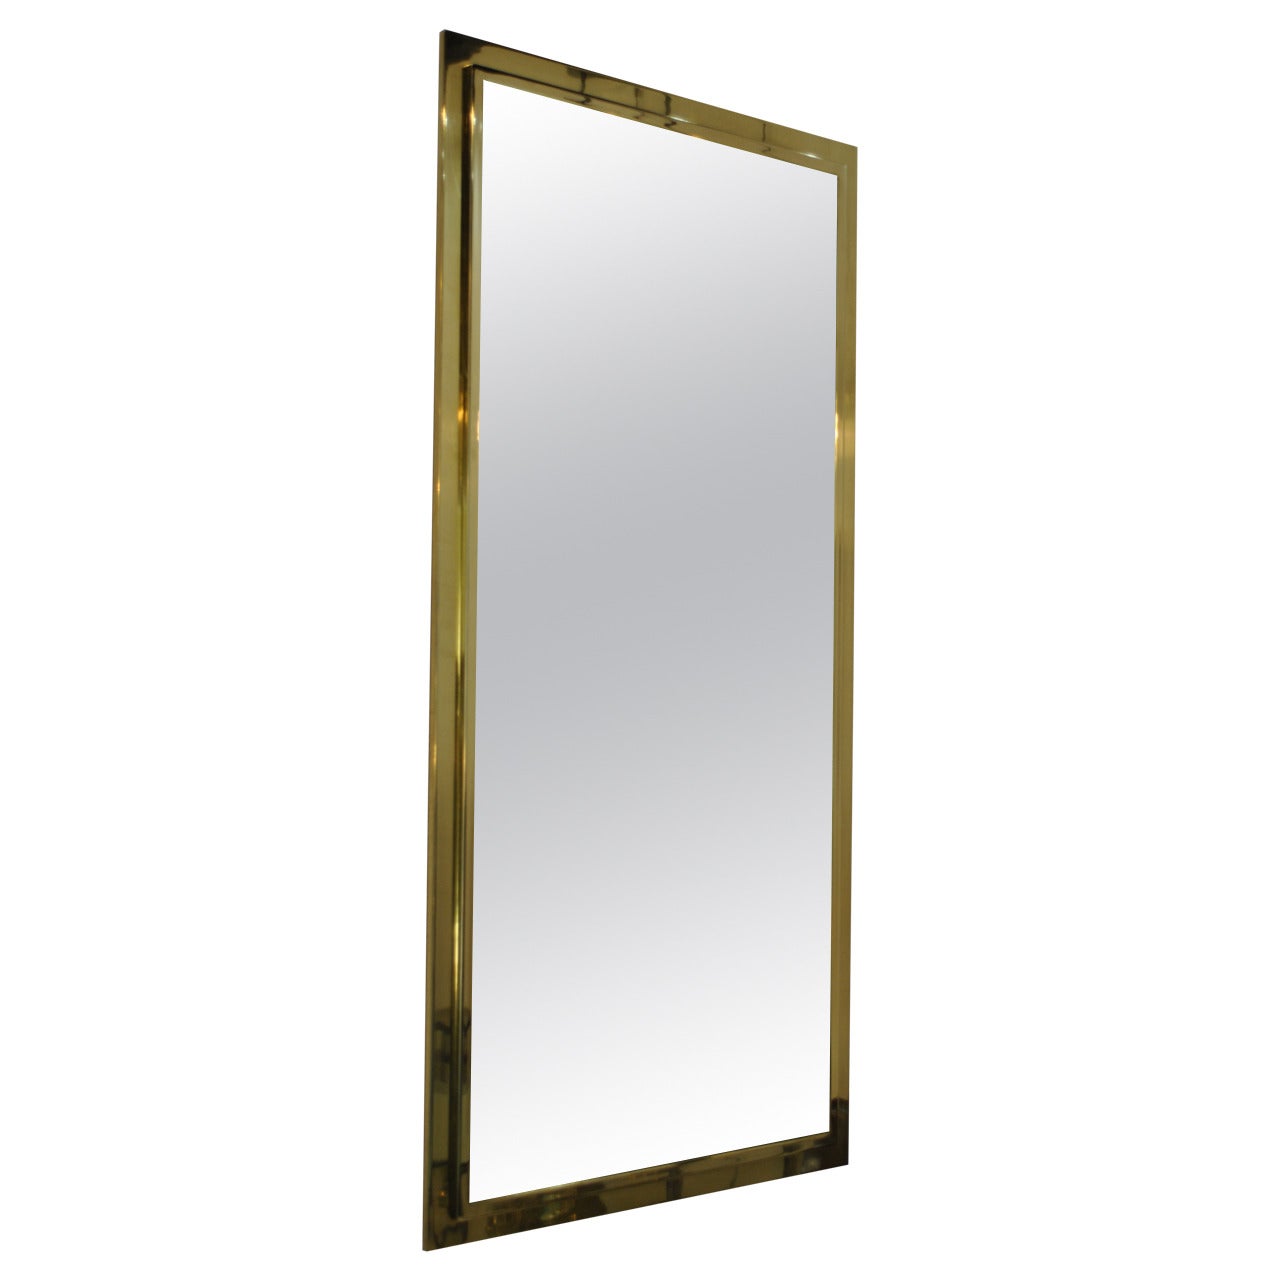 Large 24-Karat Gold-Plated Mirror by Belgo Chrom Dewulf Selection, 1970s For Sale